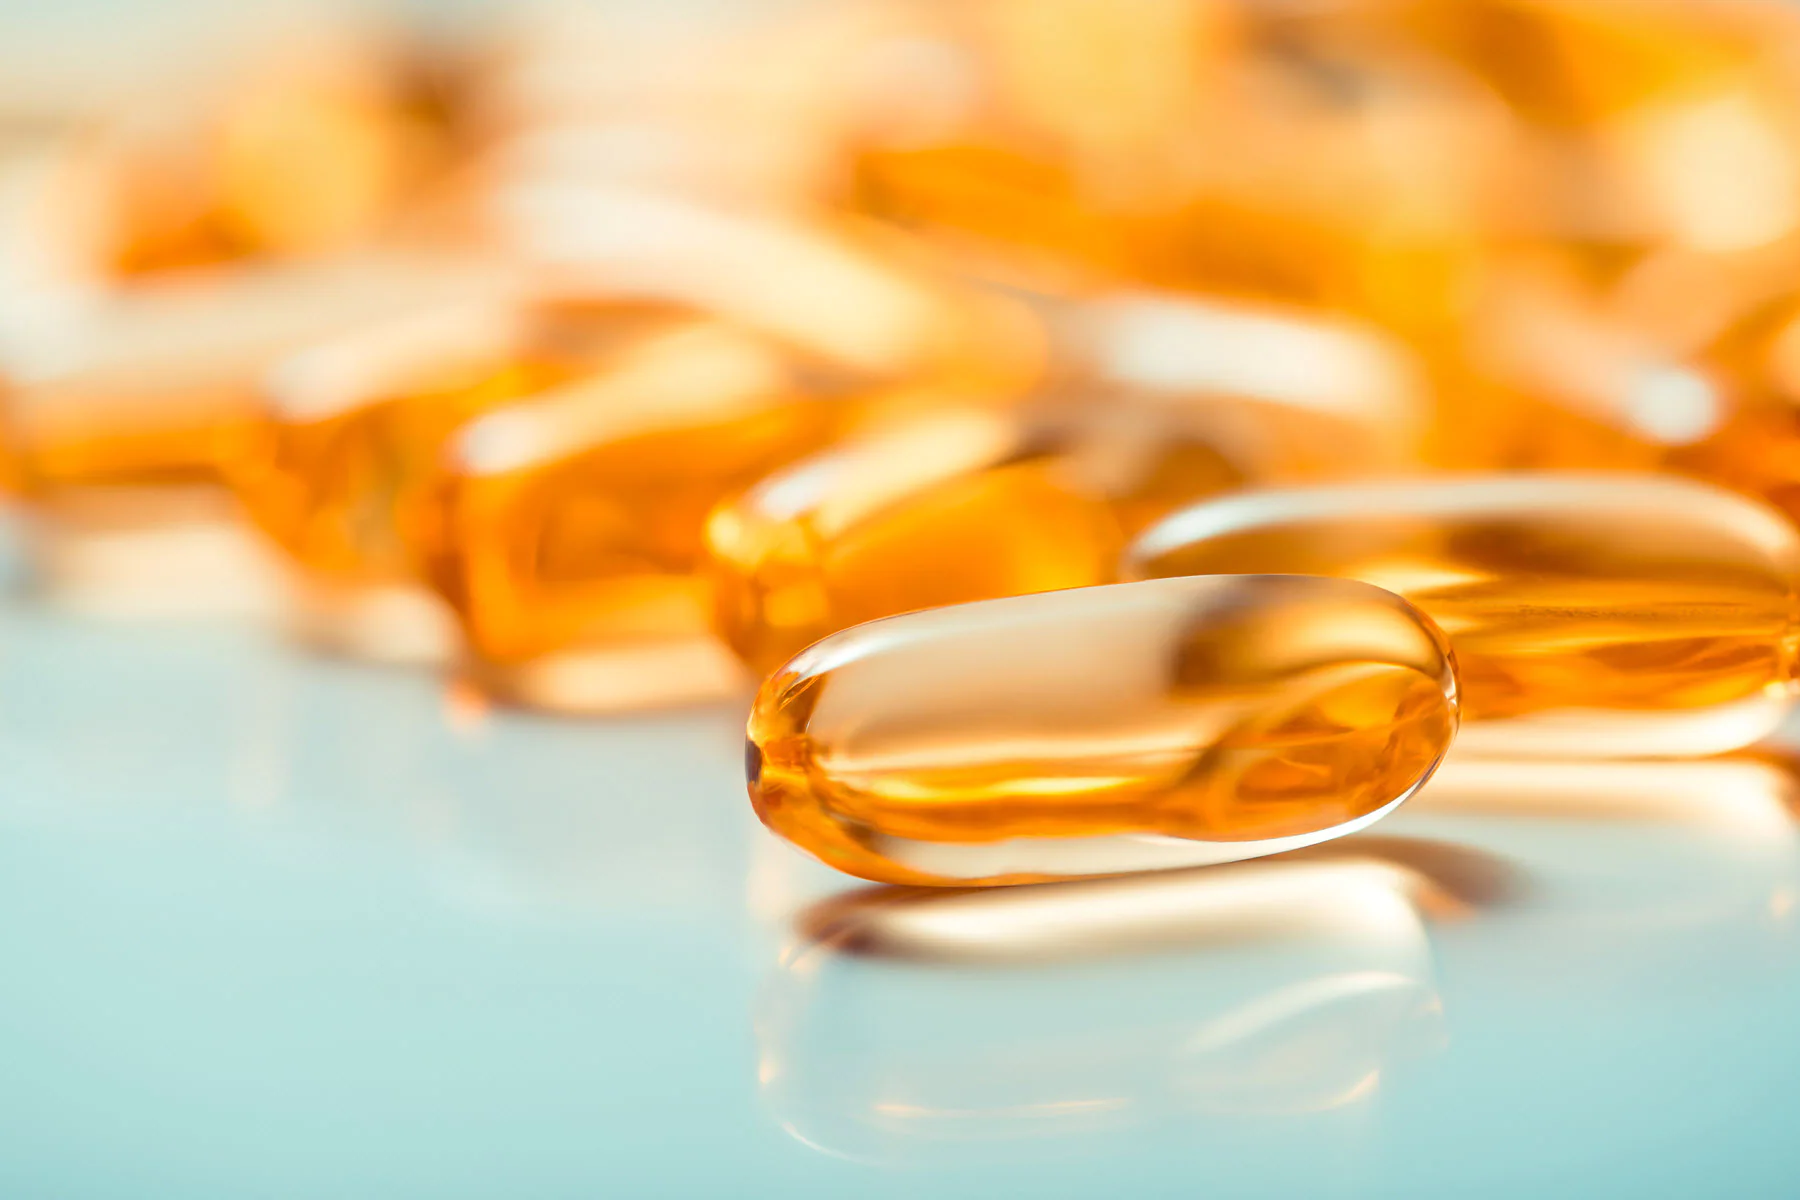 Fish Oil Supplements Might per chance also Relief Battle Depression